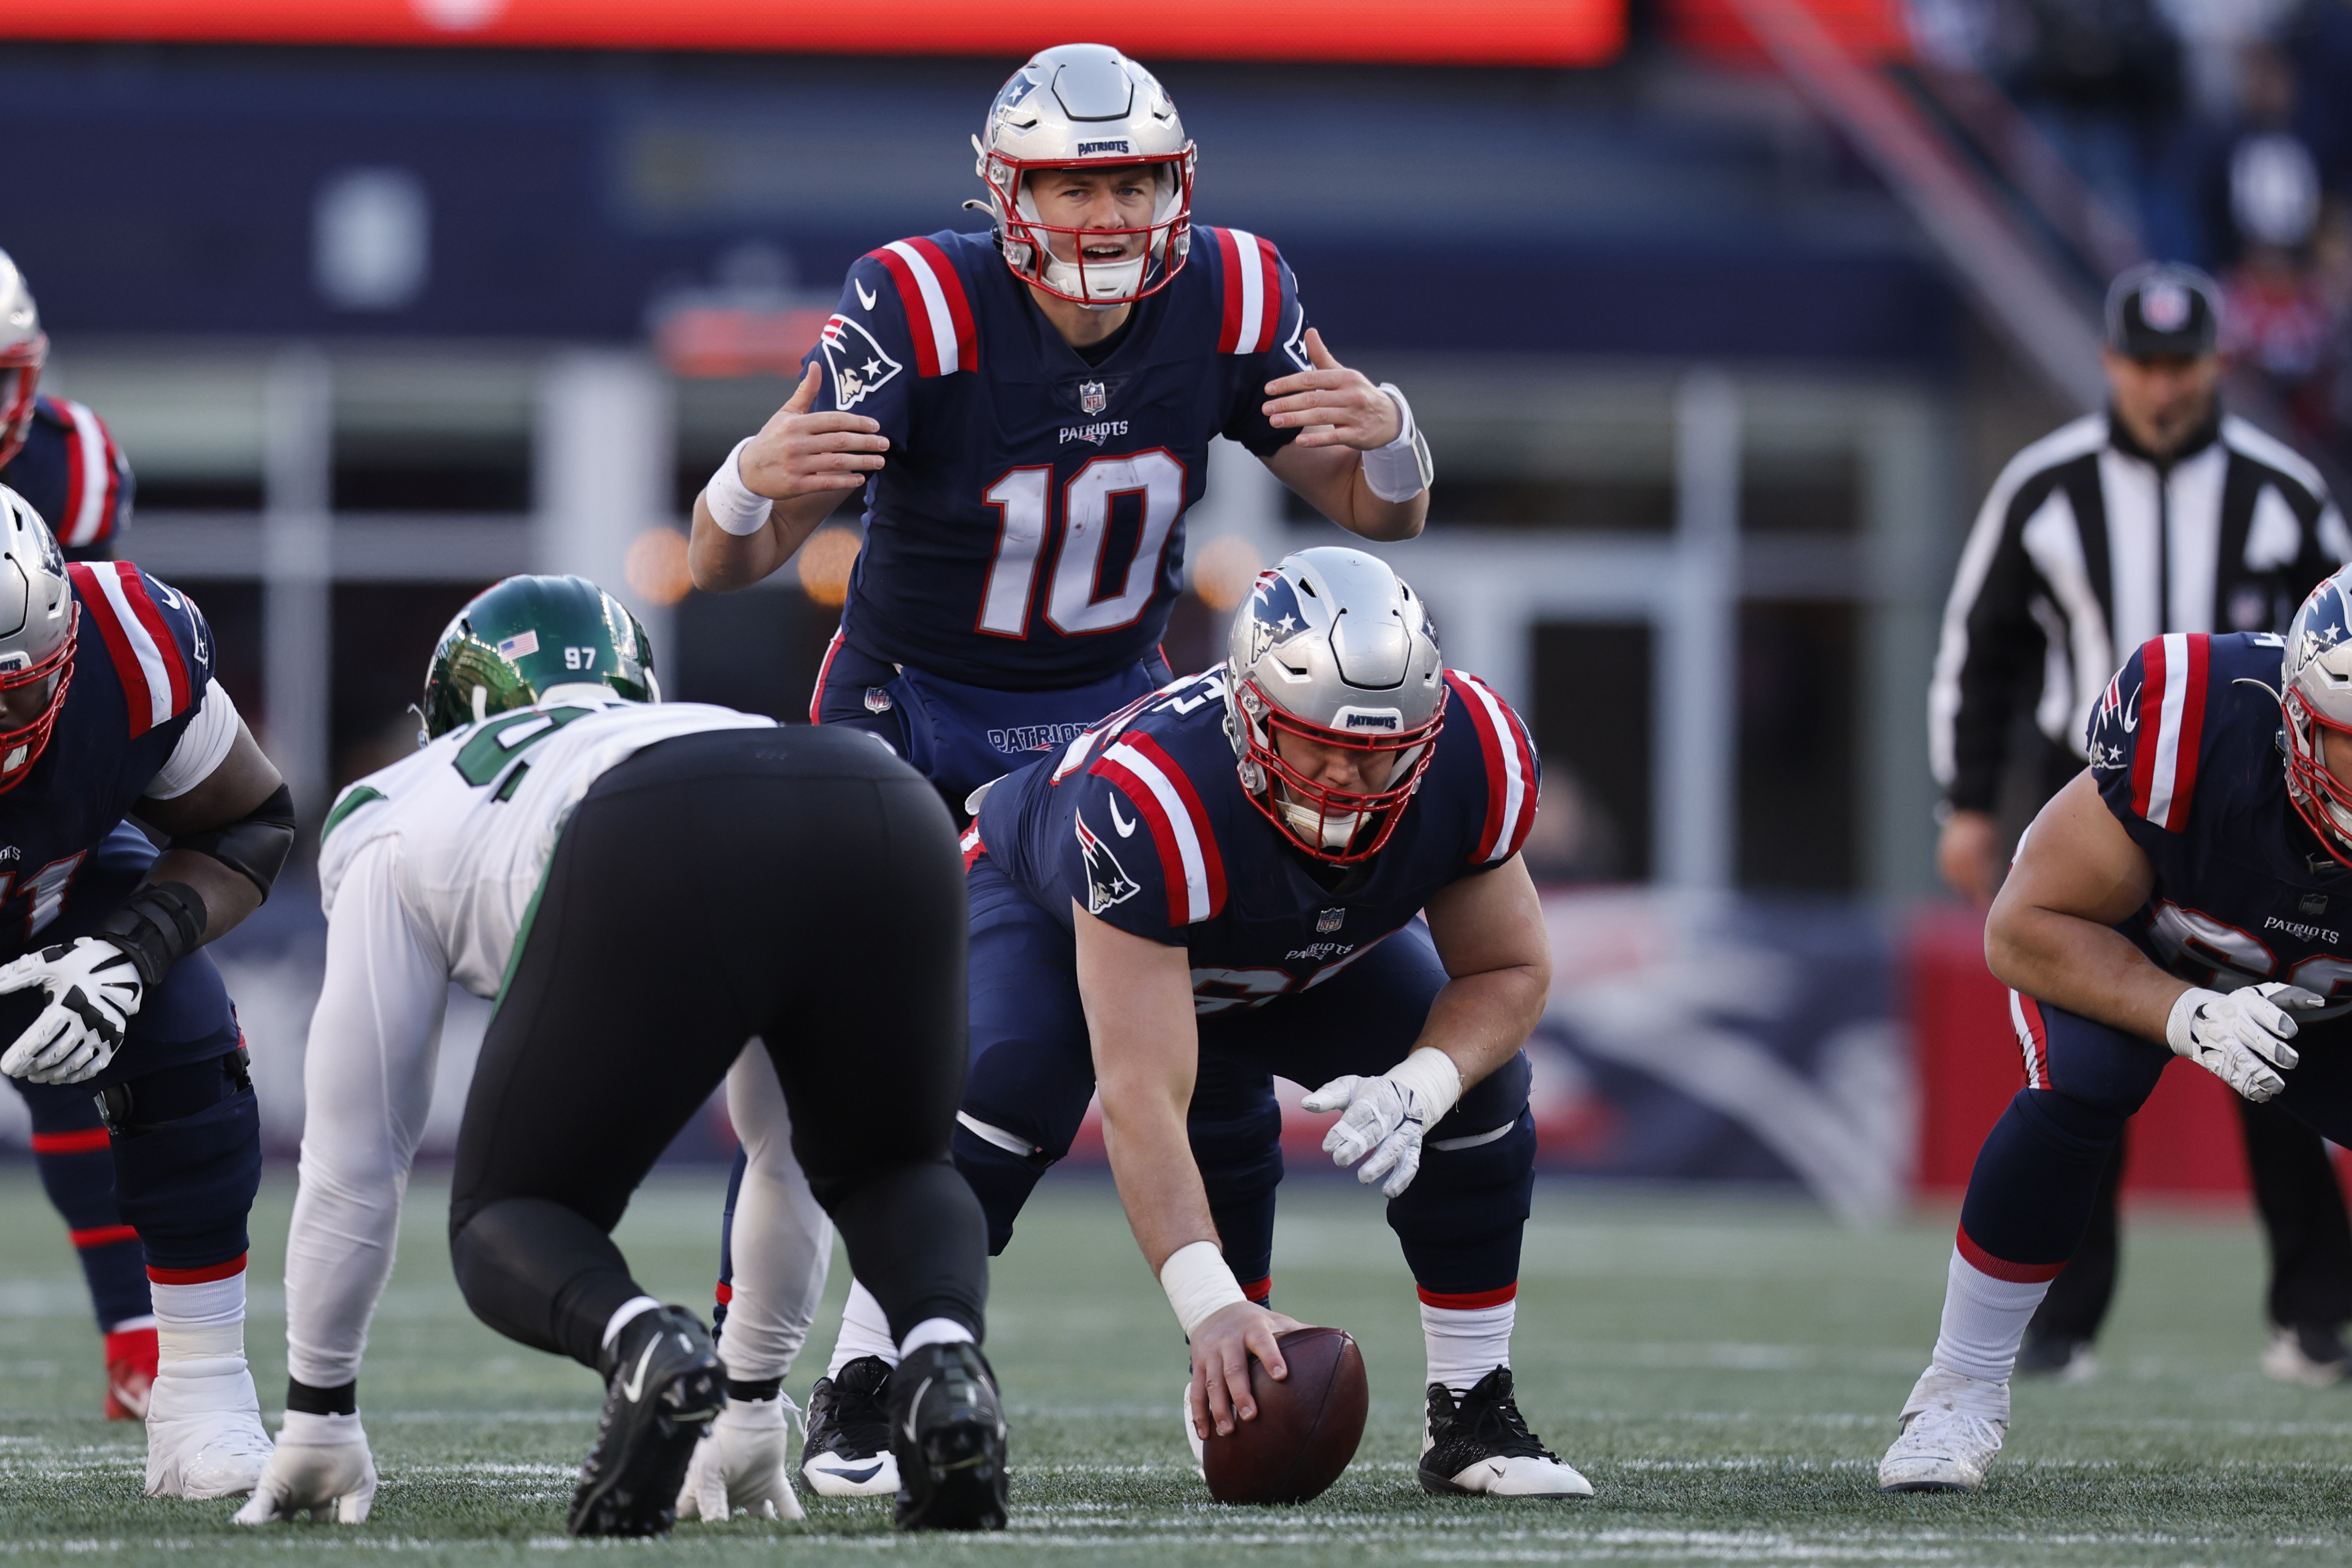 Patriots set Mac Jones up to fail, offensive issues aren't on him